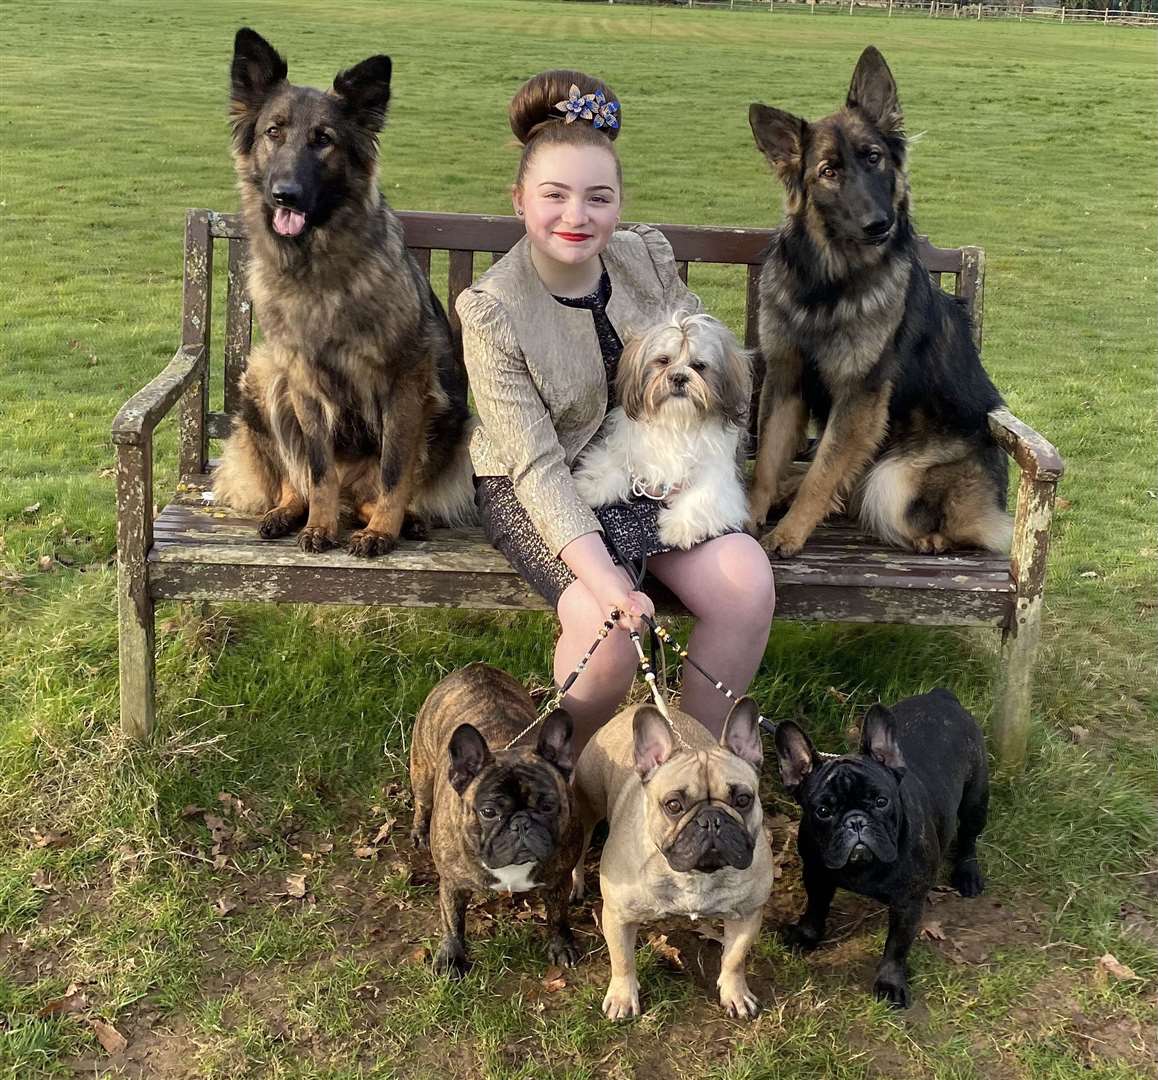 Ellissia East-Hickman from Marden with the 6 dogs she will be showing at Crufts - German shepherds Sheera, left, and Sable, right,, Shih Tzu Pebbles, French bulldogs Nala, left, and Cymbar, middle and Voodoo, right. Picture: Animals News Agency